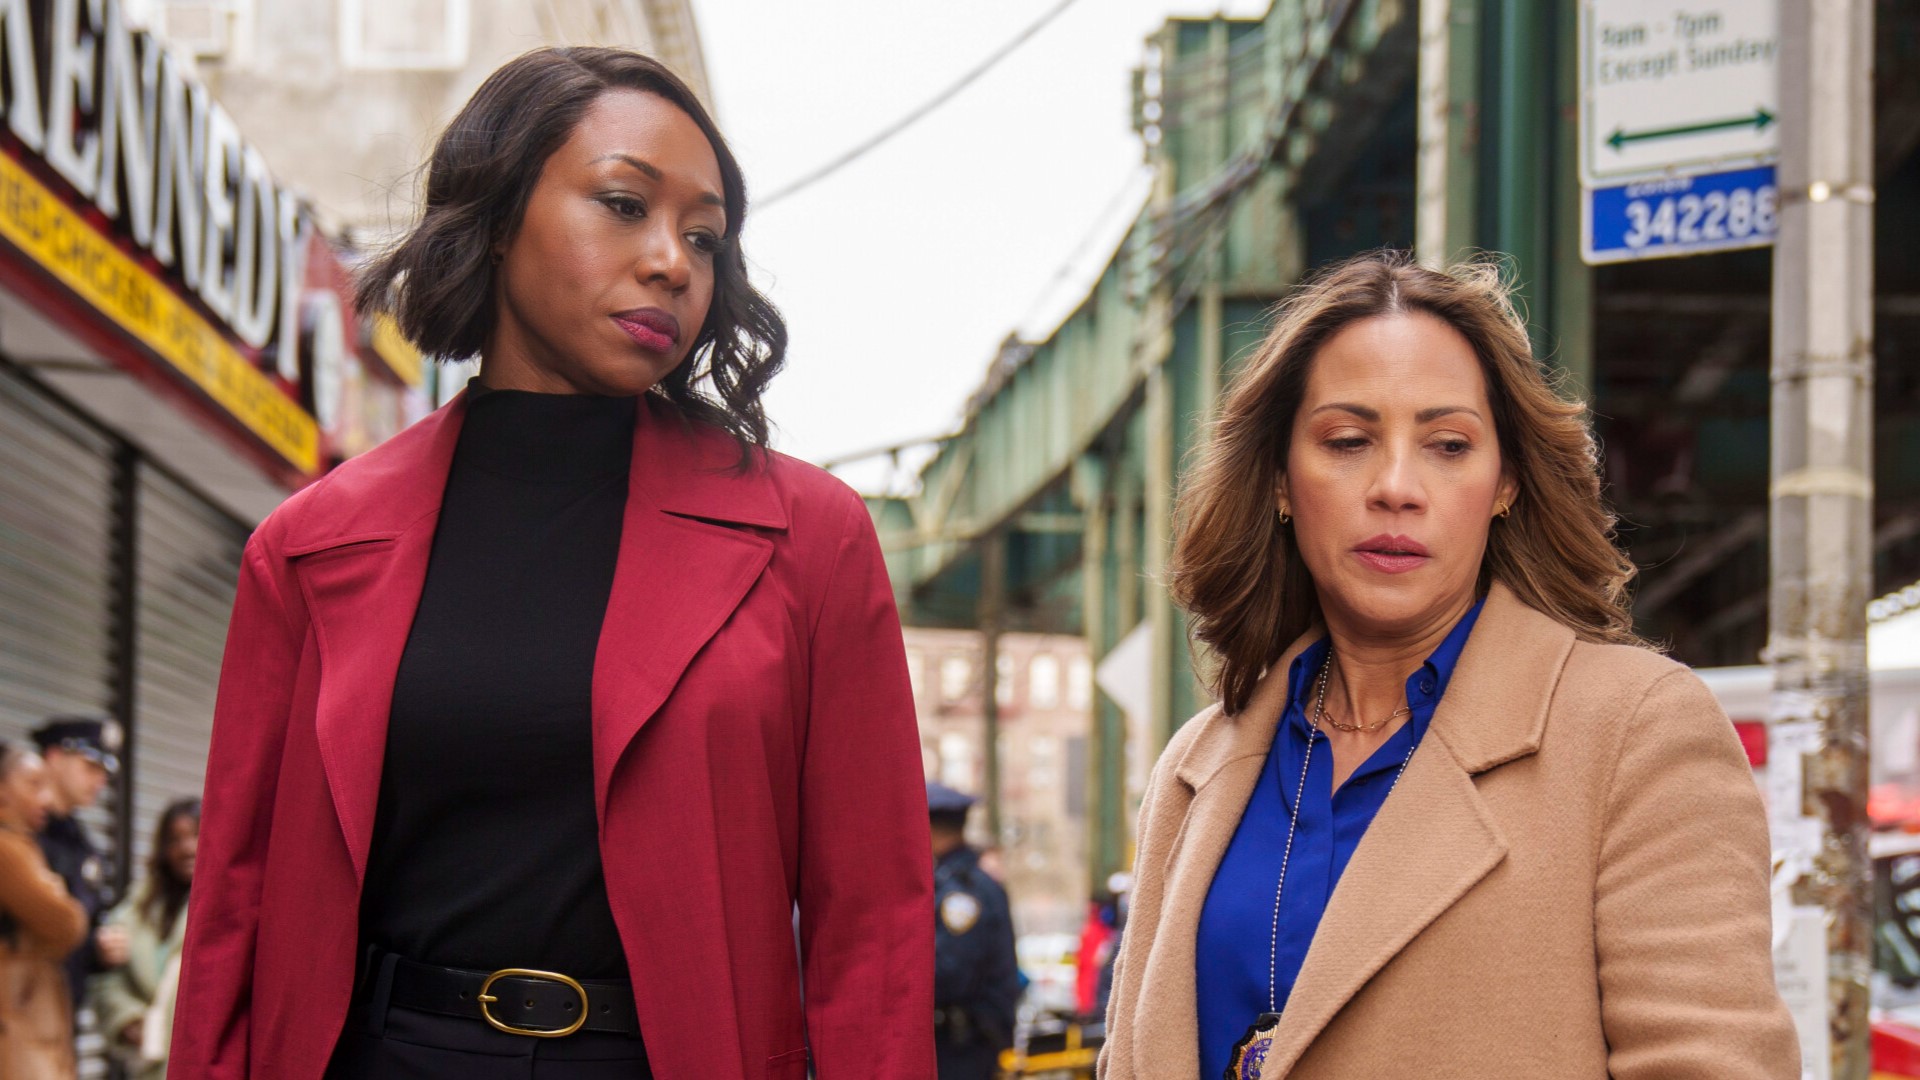 Actors Amanda Warren and Jimmy Smits give us a preview of the new CBS drama 'East New York'.